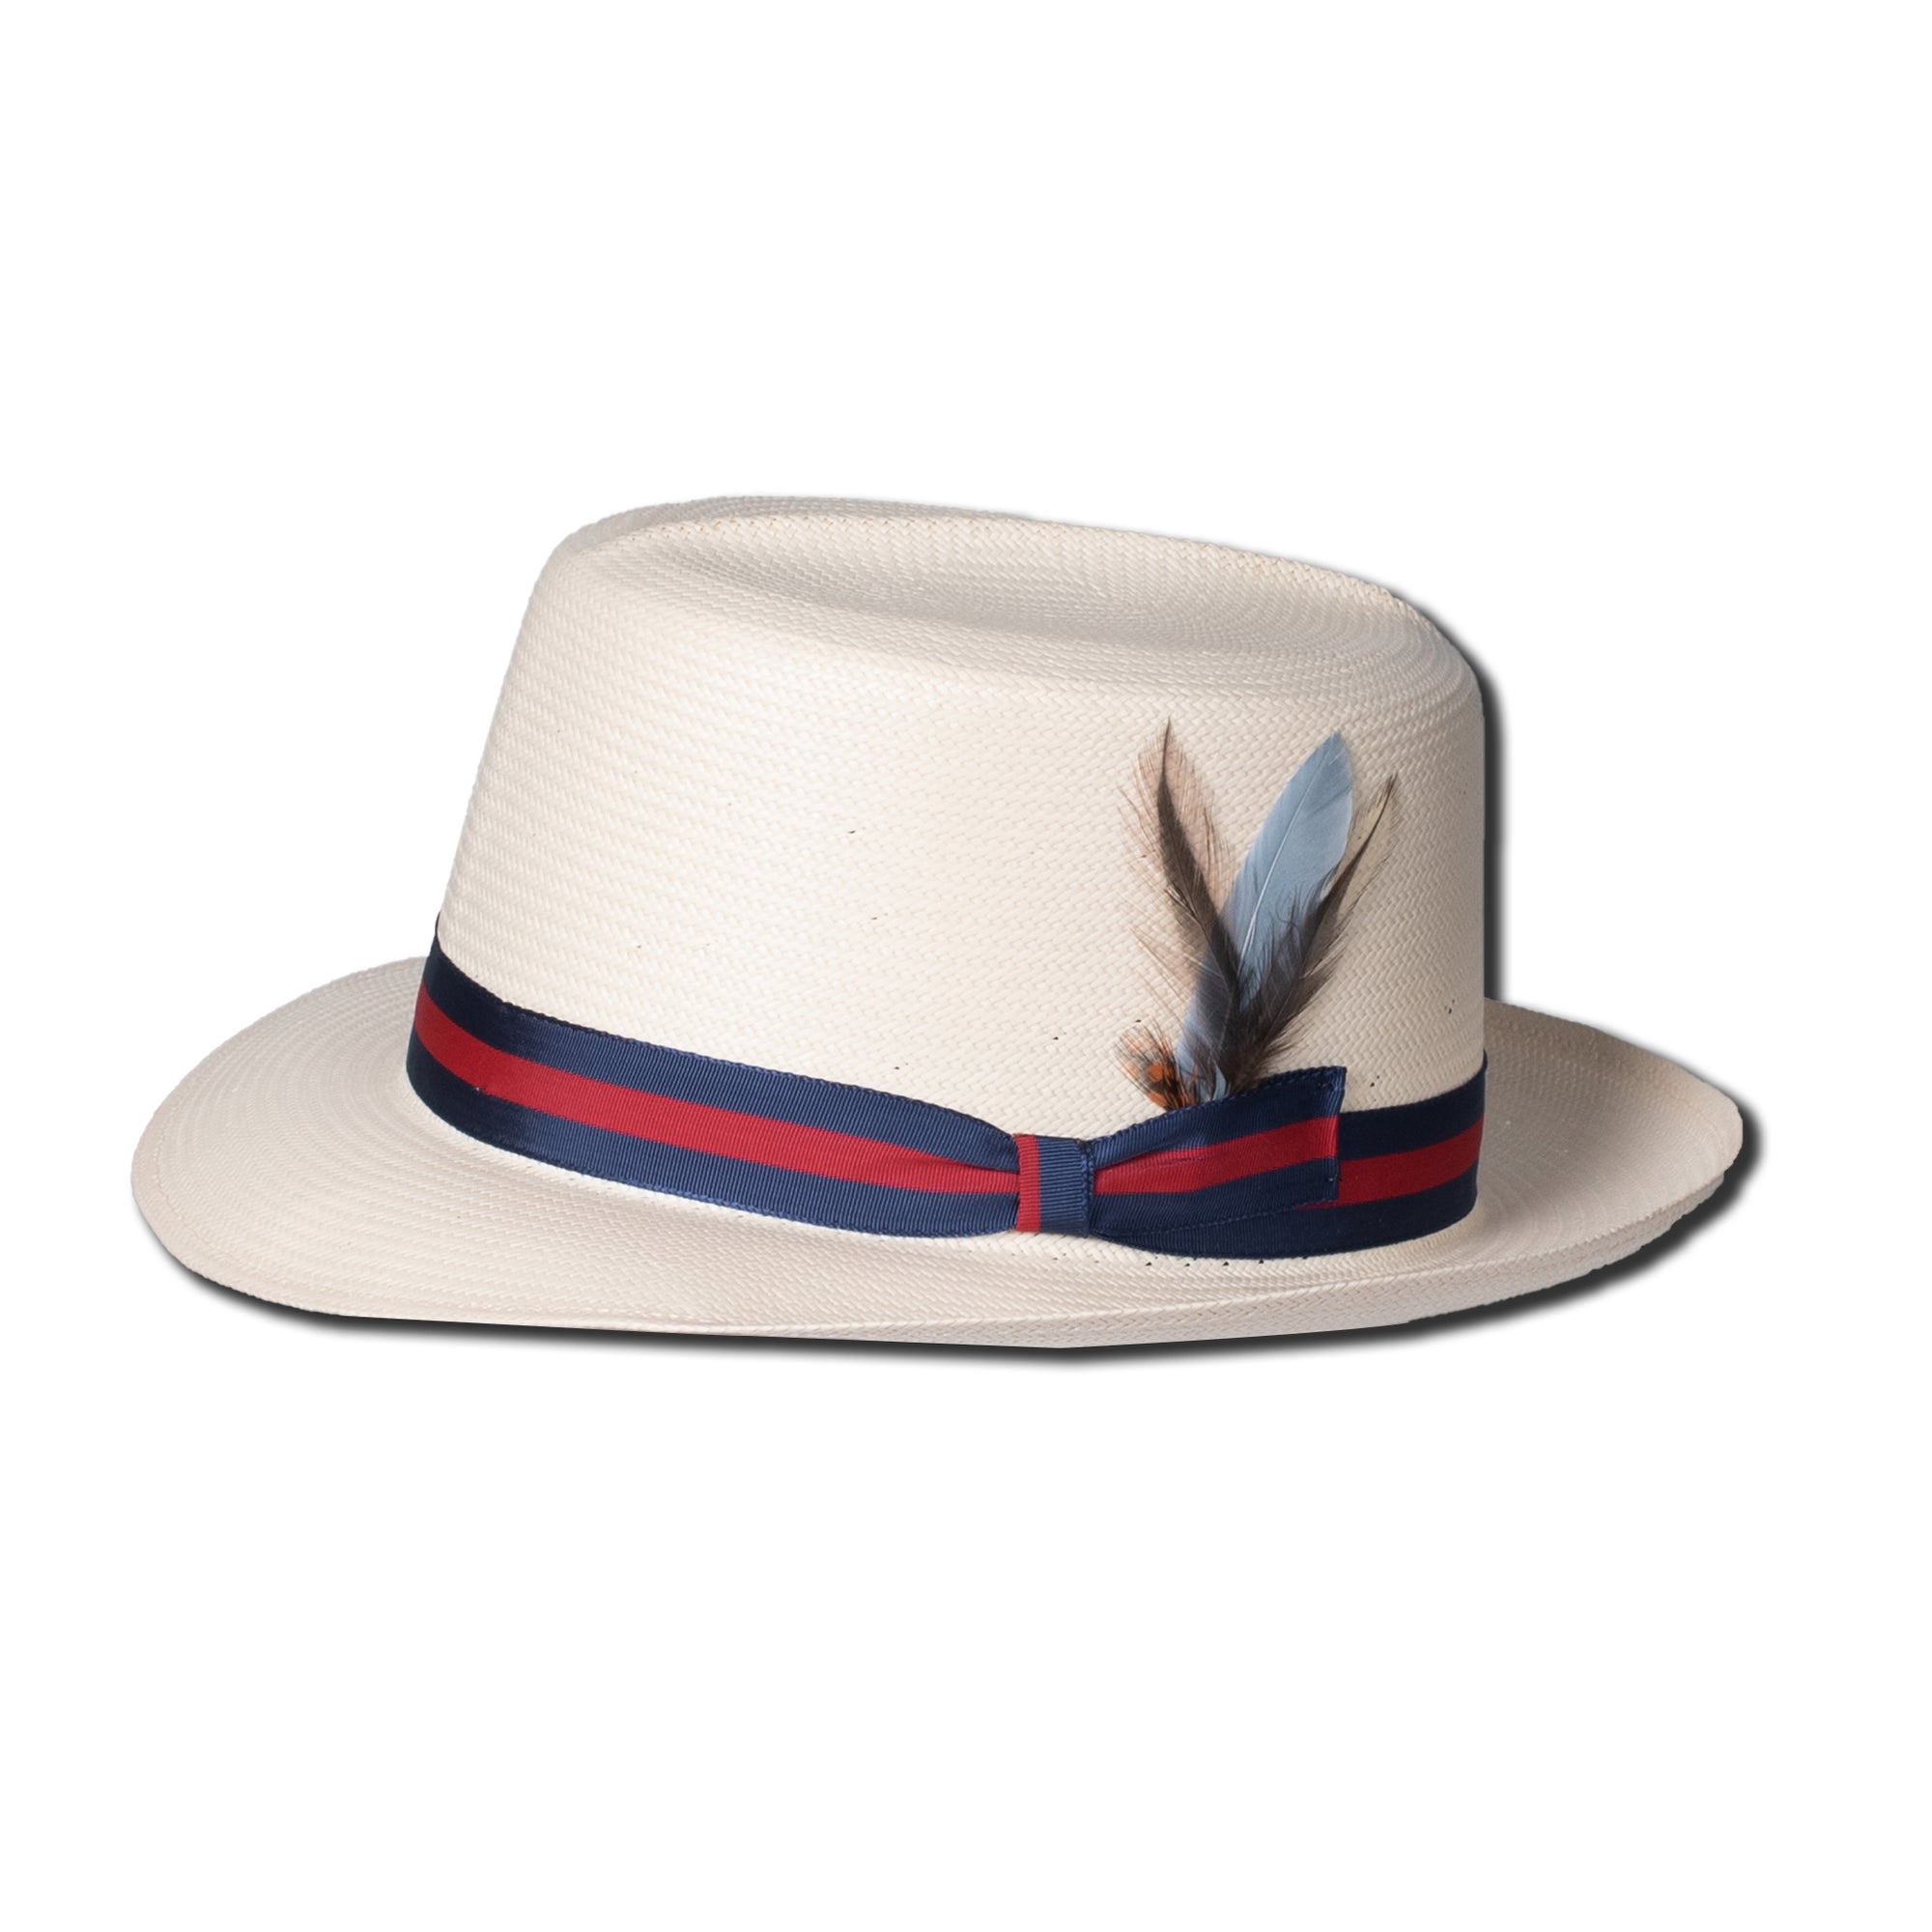 Optimo Straw Hat by Capas